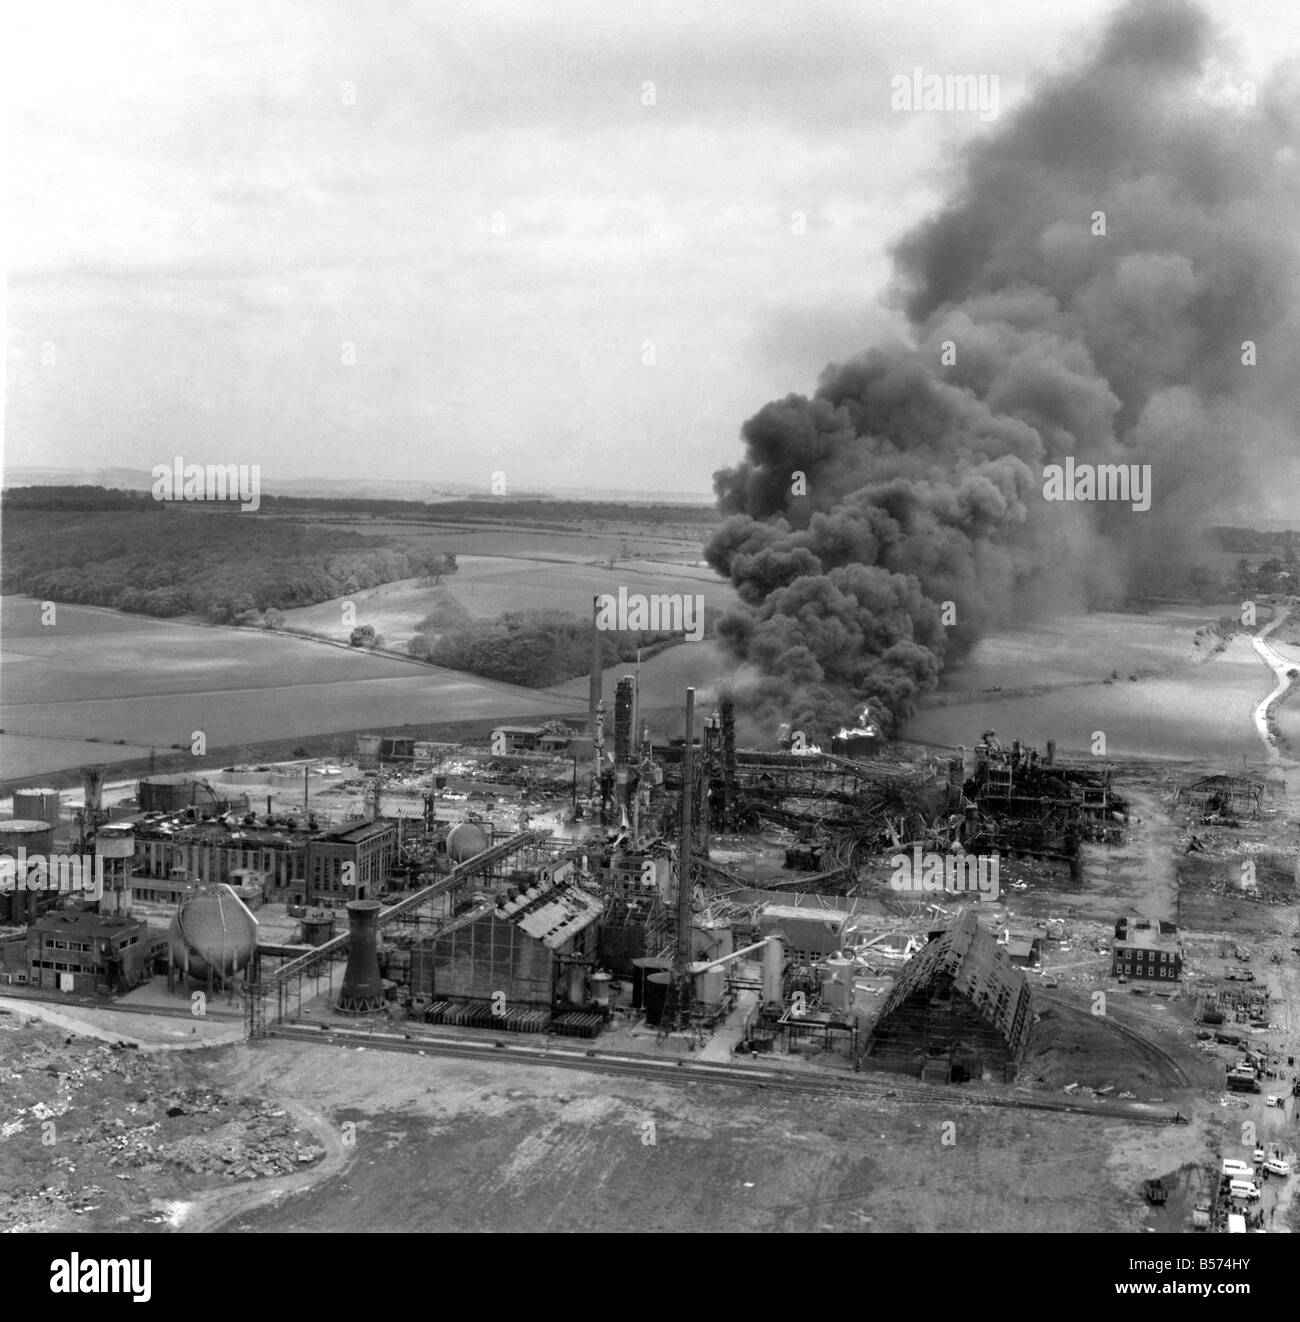 Disaster Blast At Flixborough A massive blast ripped apart an entire village late on Saturday afternoon, 1st June 1974. At least 29 people died and 100 houses were wrecked when an explosion shook the Nypro chemical plant at the Lincolnshire village of Flixborough. 3,000 people were evacuated as firemen tried to prevent an escape of poisonous gas from ammonia tanks, seven miles away in Scunthorpe flying glass caused injuries and homes shook thirty miles away. The scene of devastation at Nypro works, Flixborough. June 1974 P004444 Stock Photo